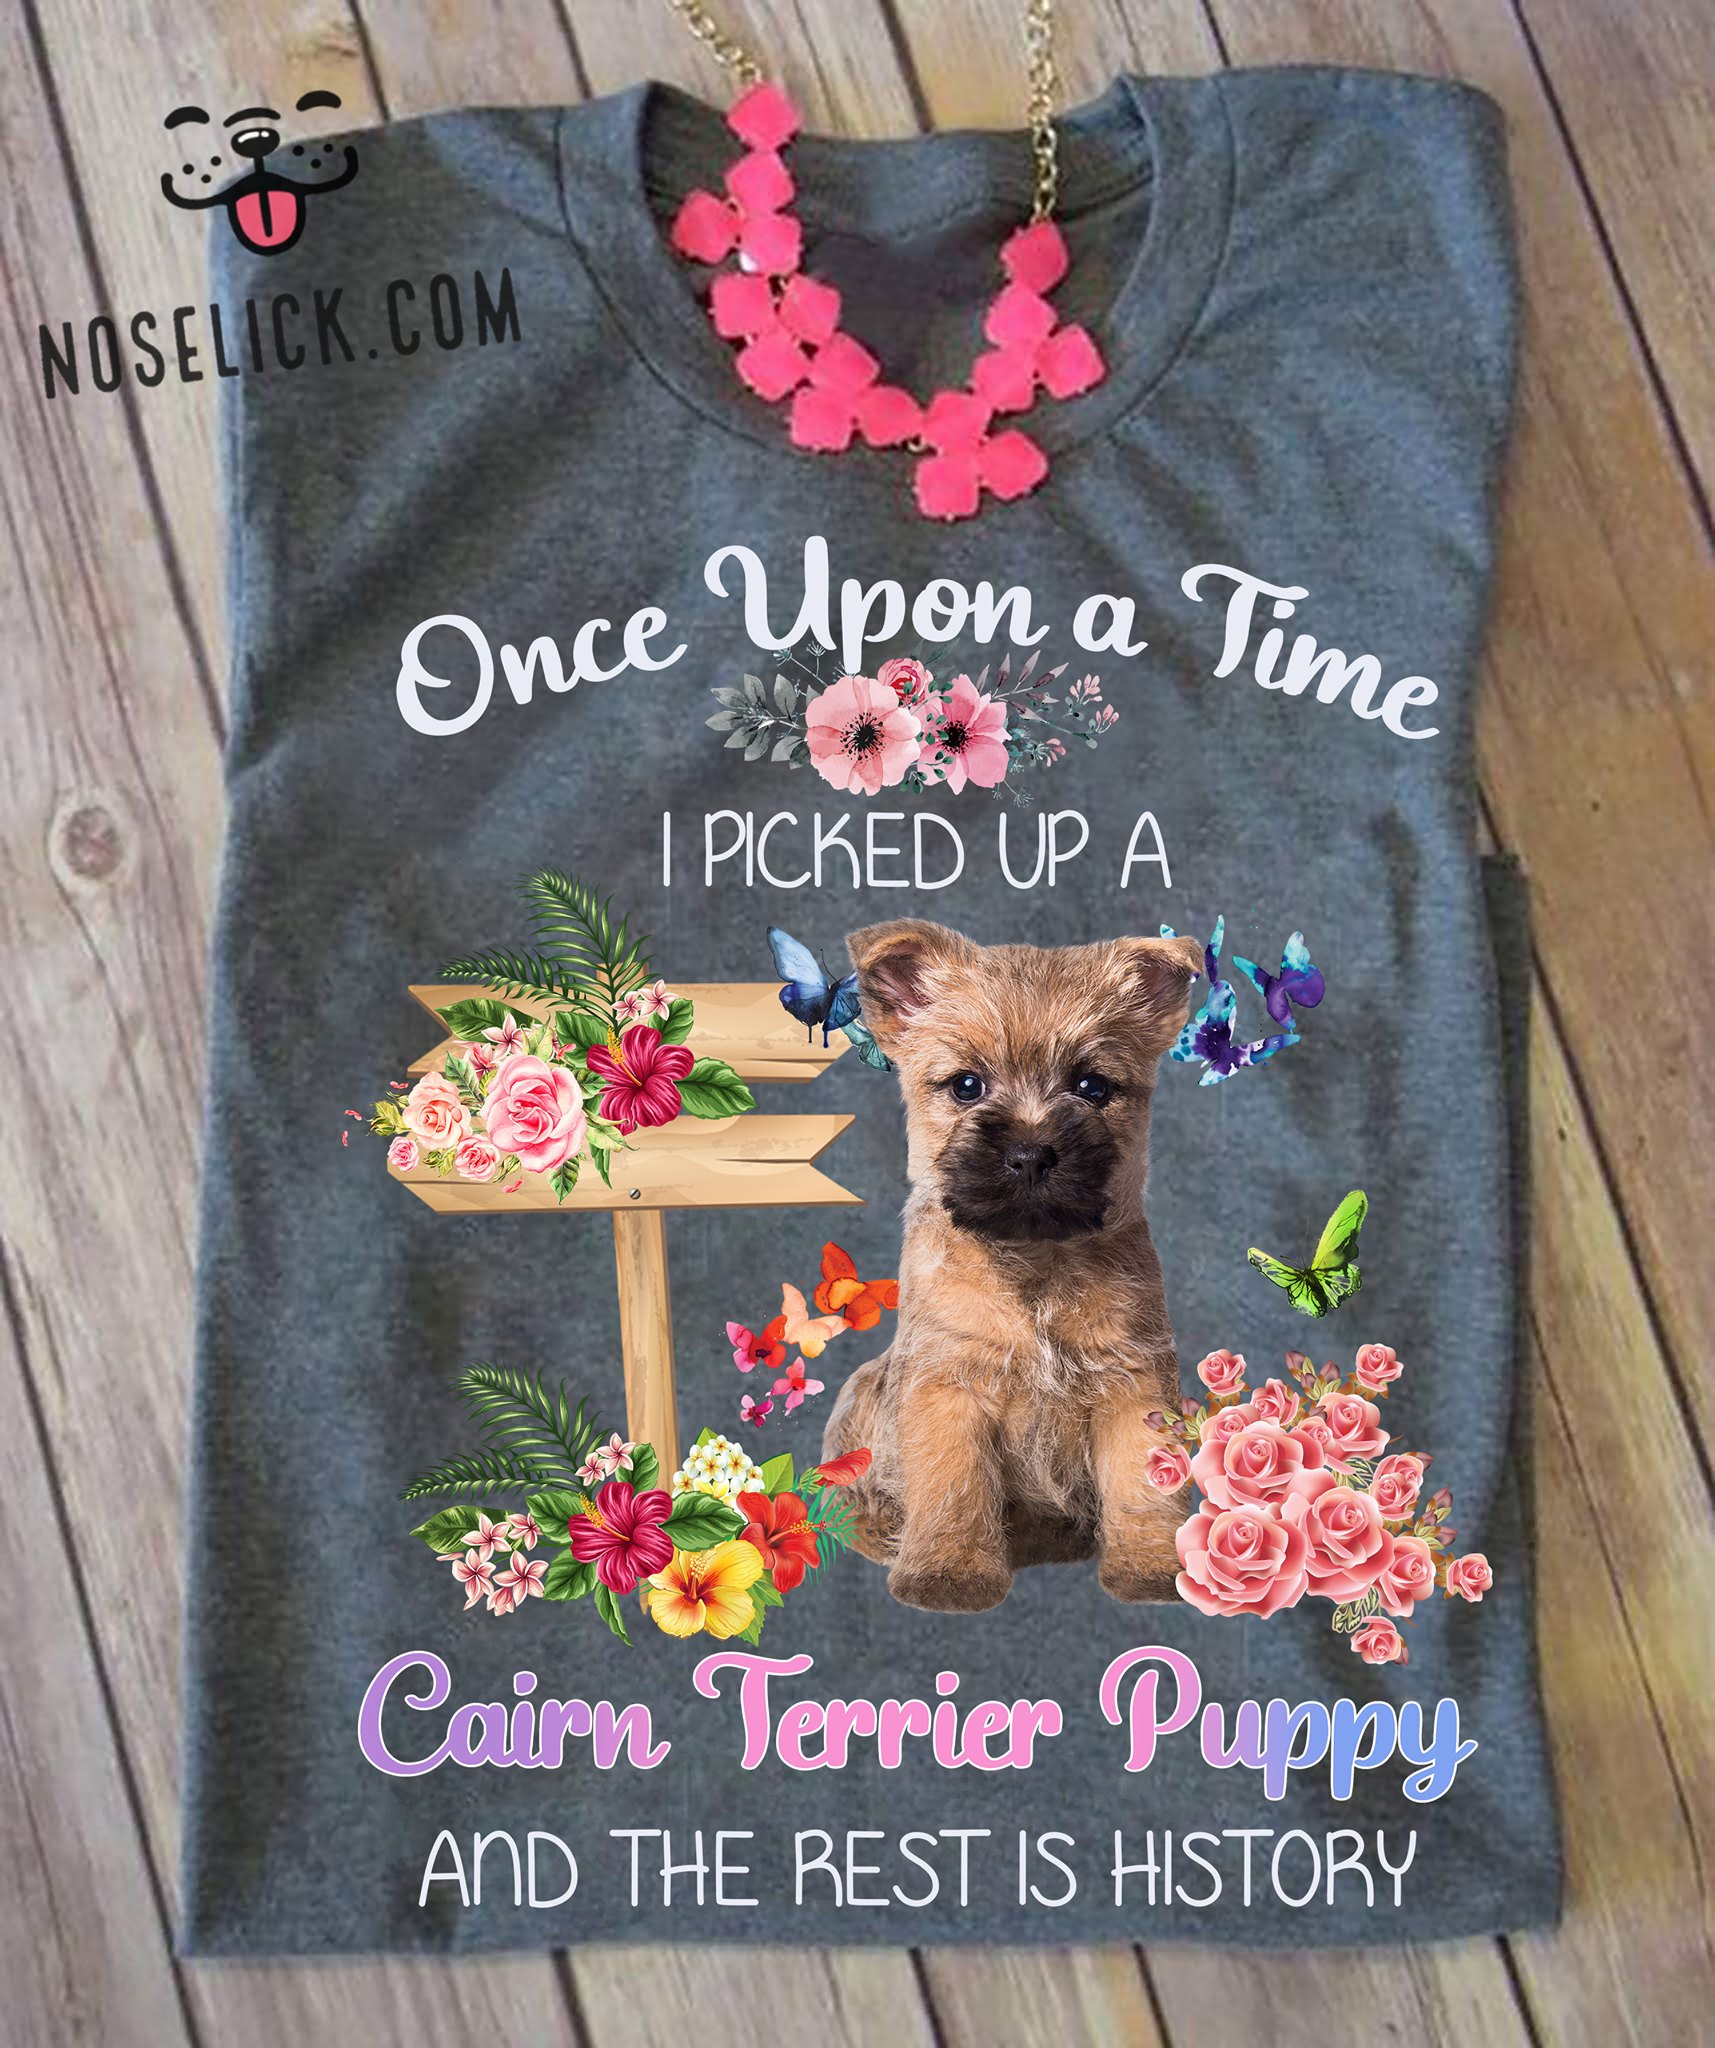 Once upon a time I picked up a Cairn terrier puppy and the rest is history - Dog lover